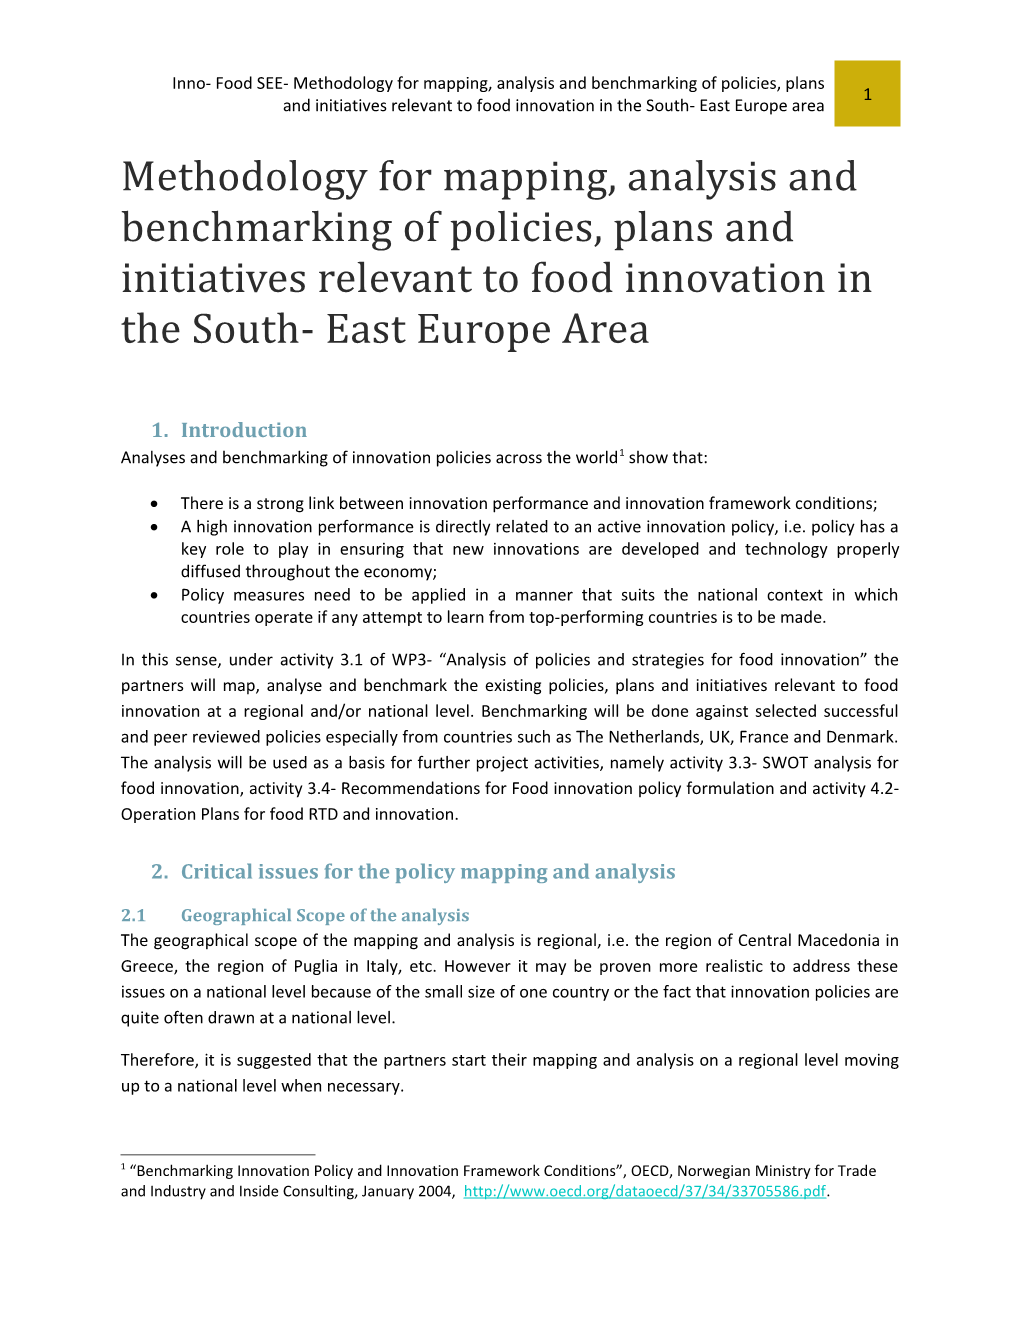 Inno- Food SEE- Methodology for Mapping, Analysis and Benchmarking of Policies, Plans And